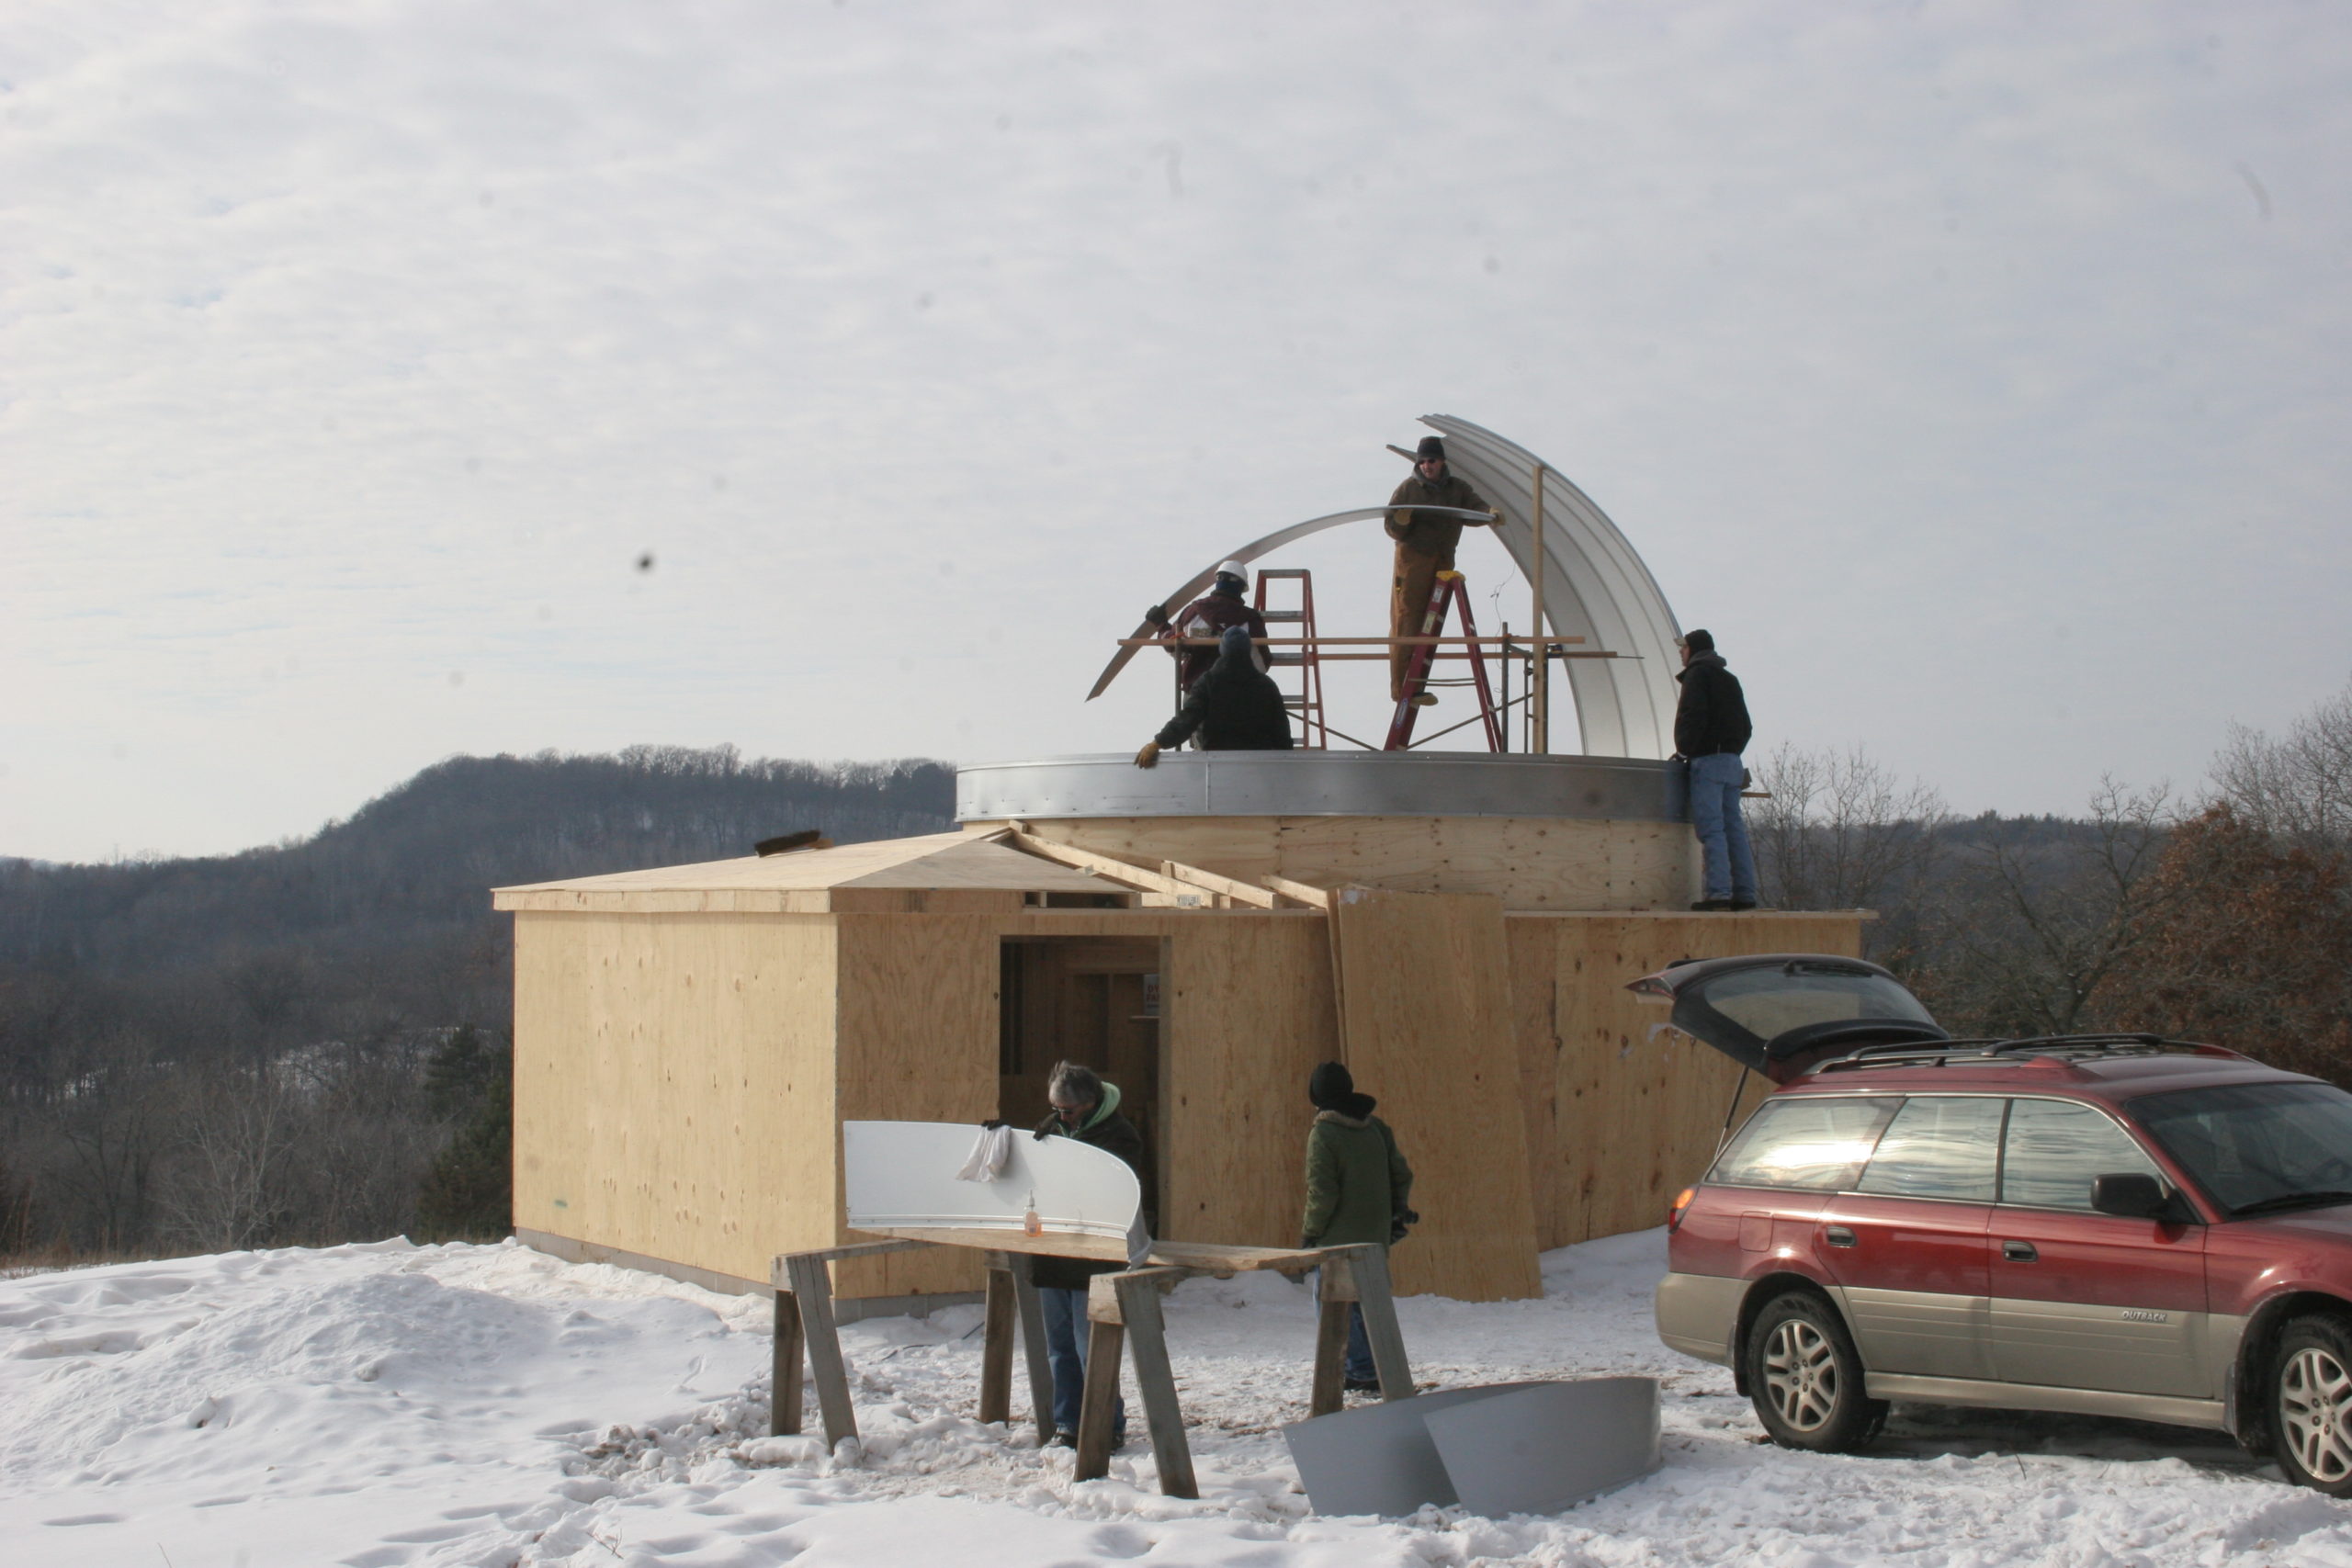 Four workers standing on and around a partially built observatory building.